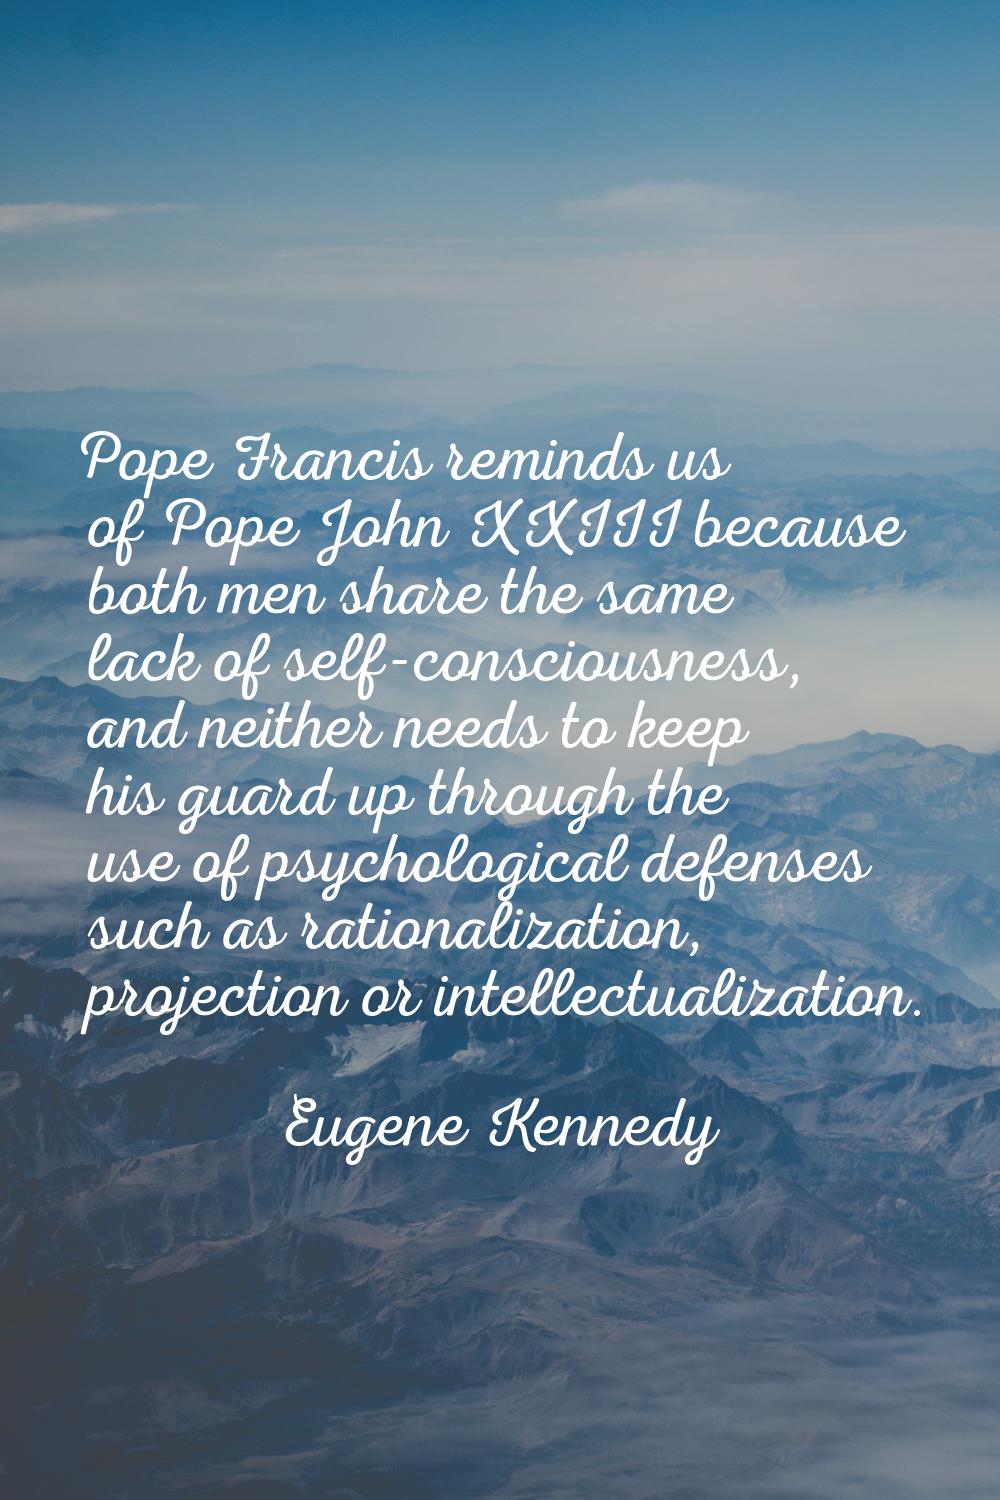 Pope Francis reminds us of Pope John XXIII because both men share the same lack of self-consciousne